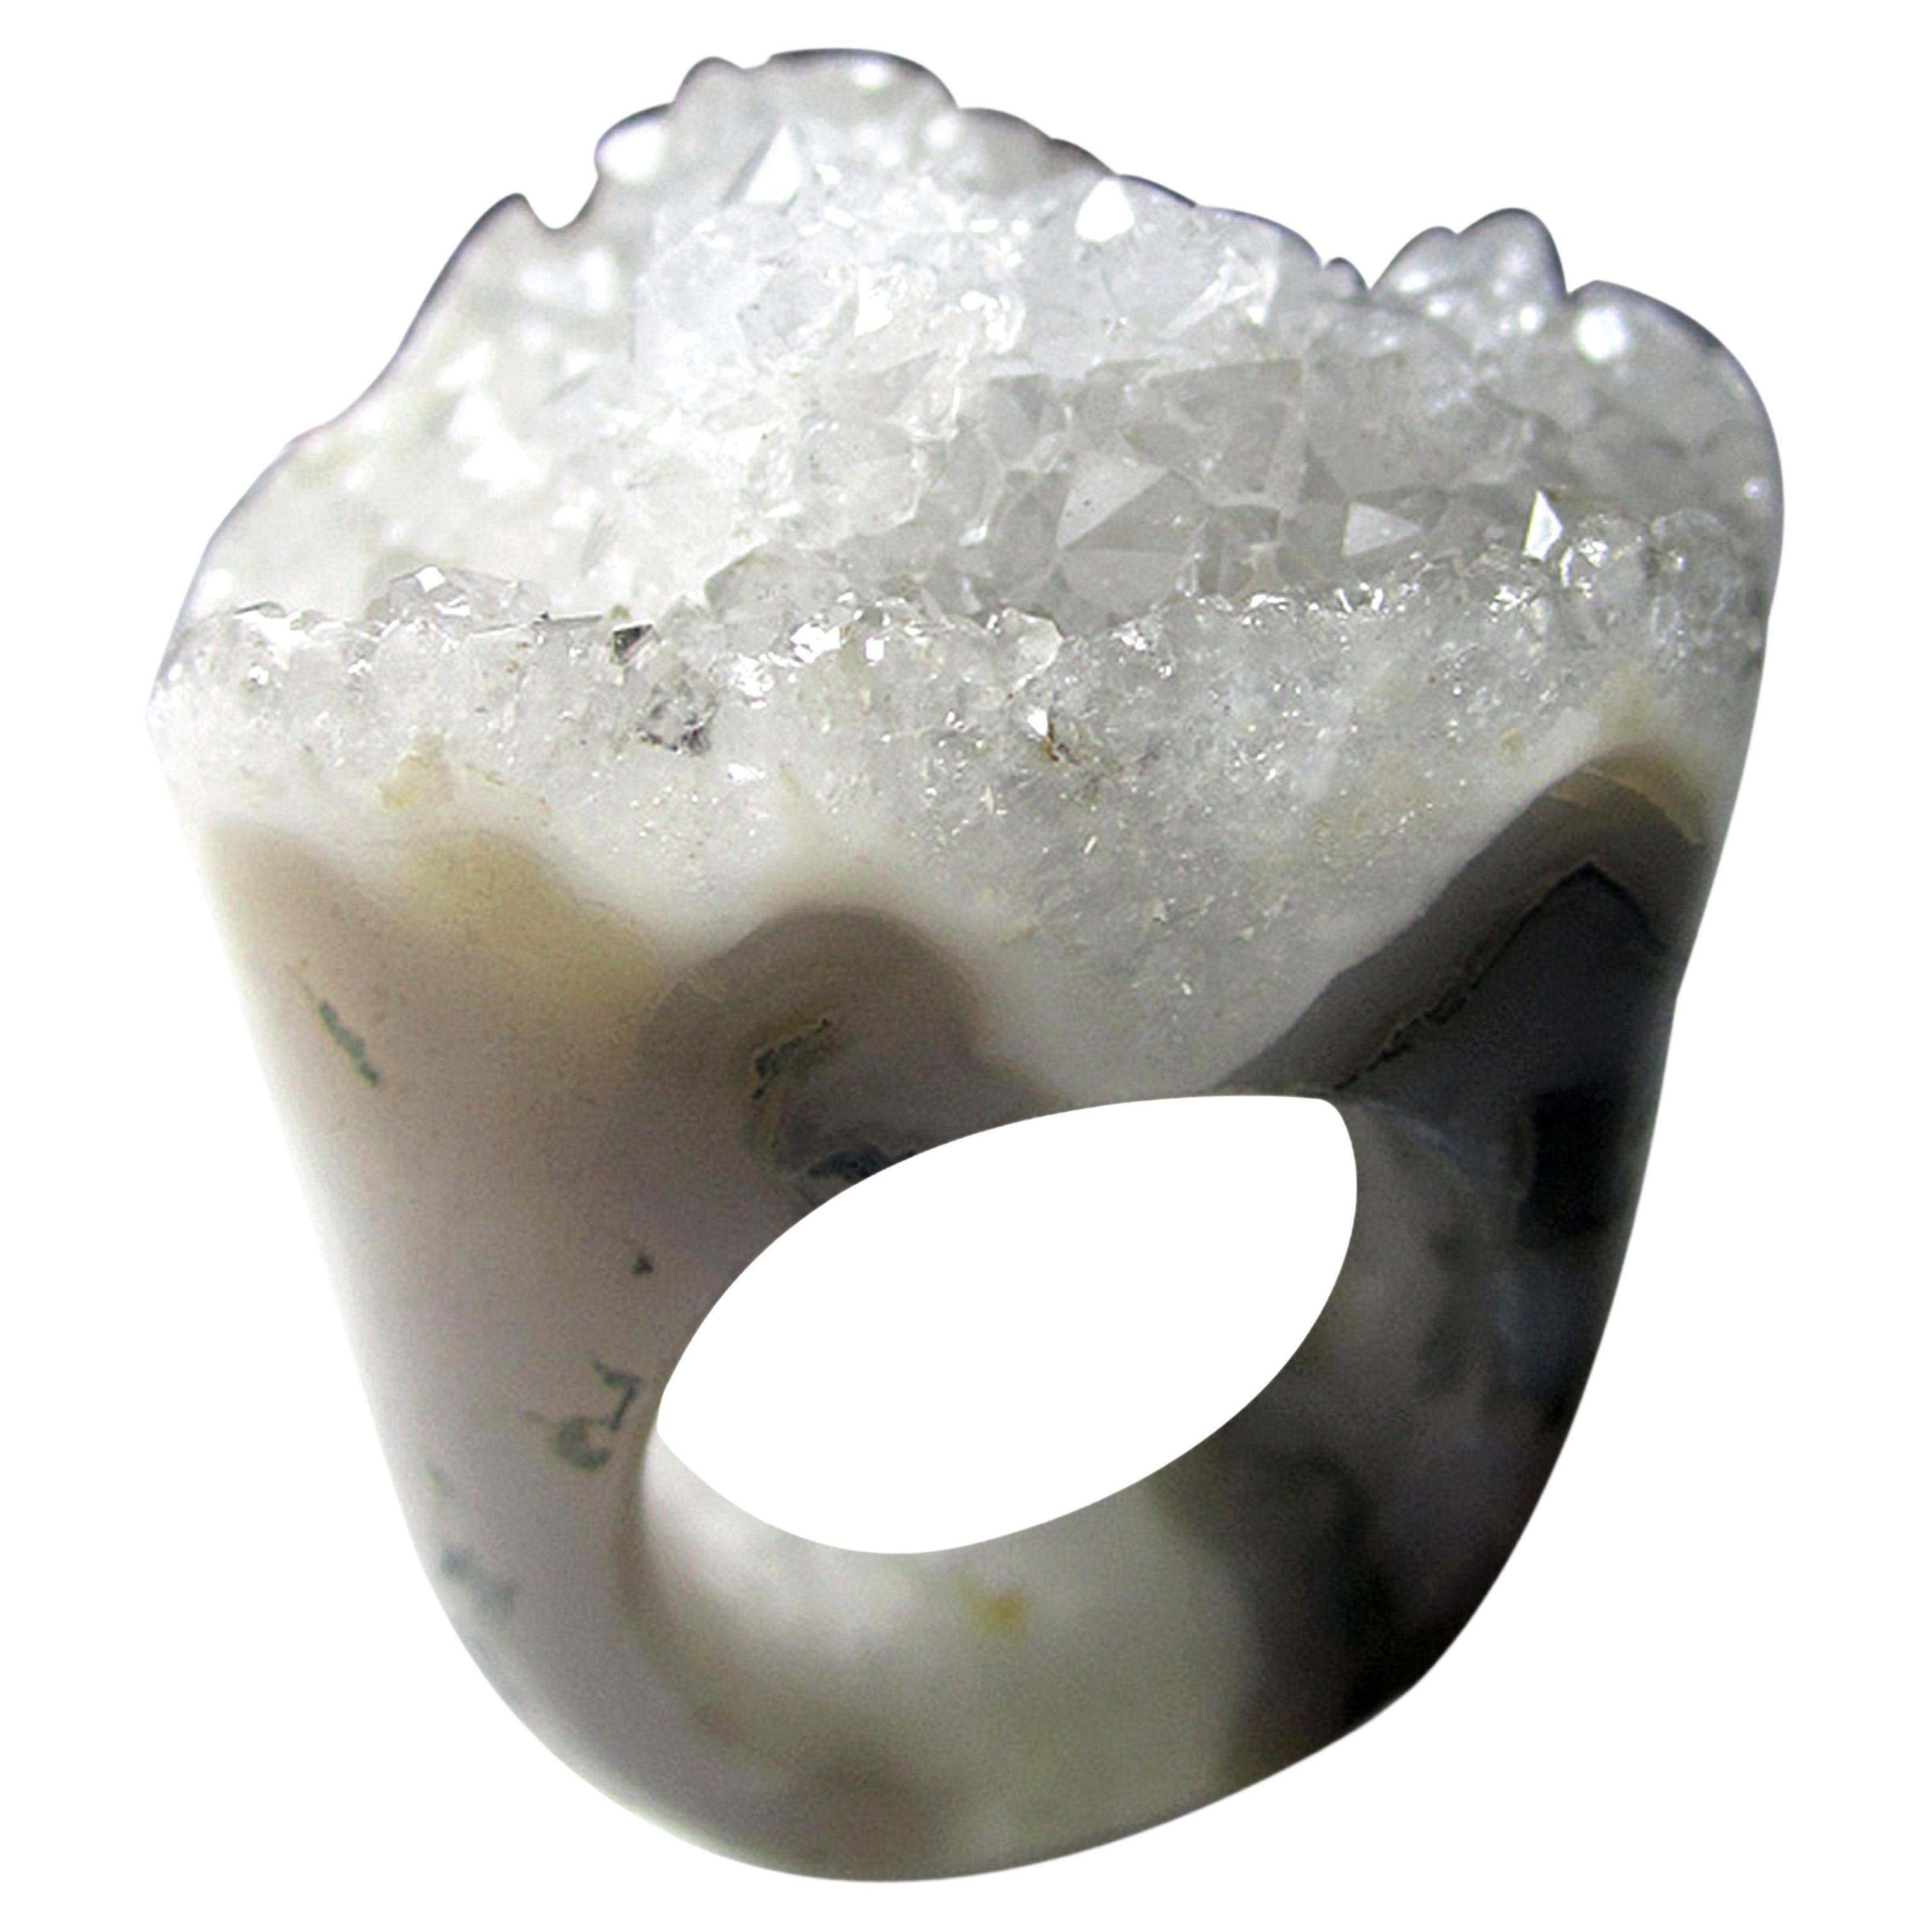 Solid Rock Crystal Ring Clear Quartz Raw Snow White Natural Brazilian Gemstone